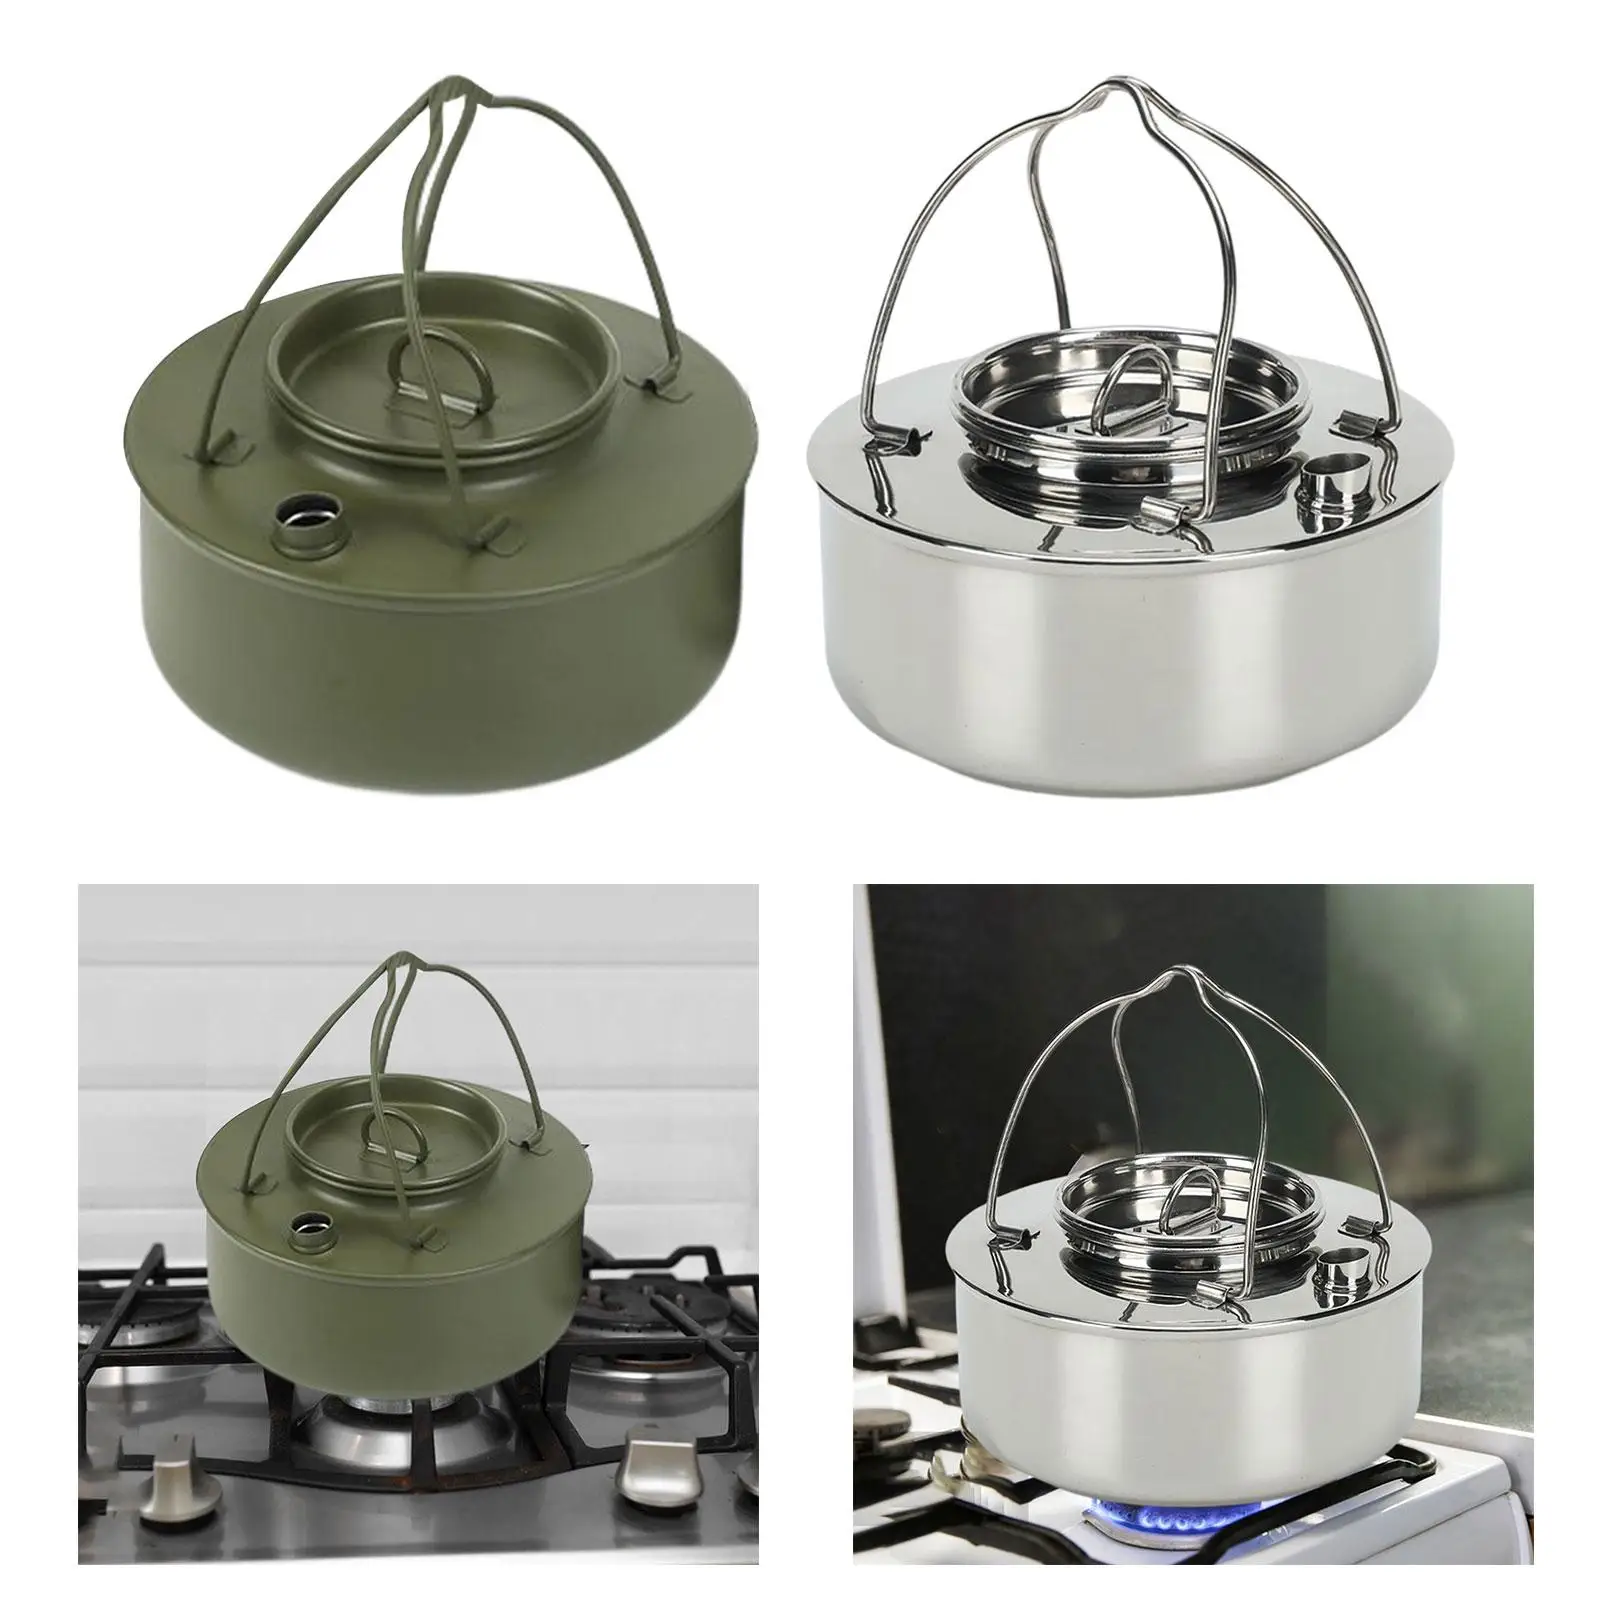 Camping Kettle Teapot with Silicone Handle Outdoor Kettle for Camping Travel